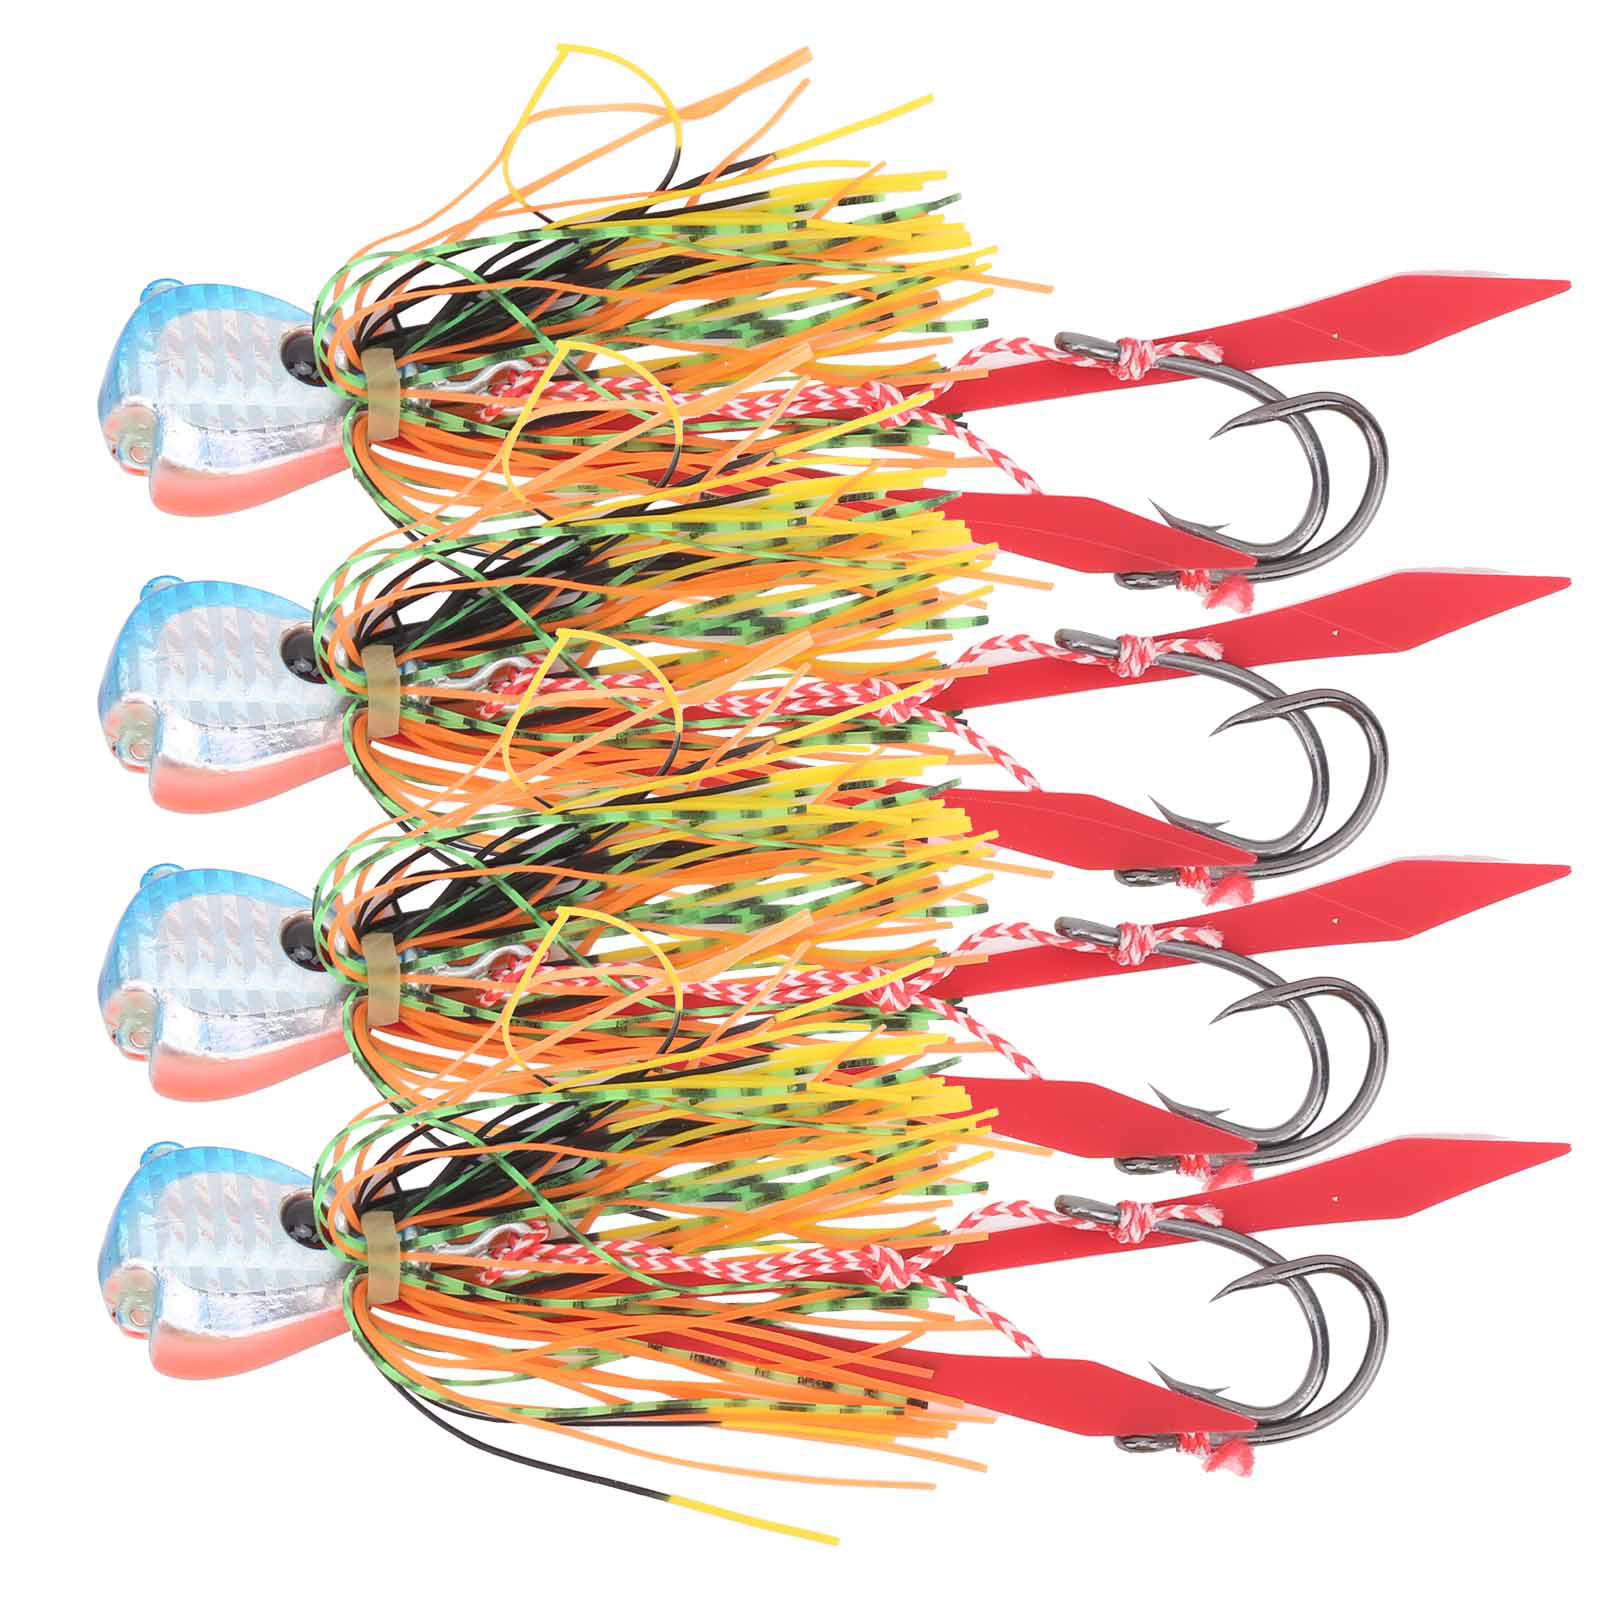 Details about   4Pcs 65g Durable Fishing Artificial Baits Silicone Skirts Lures Accessory w/Hook 